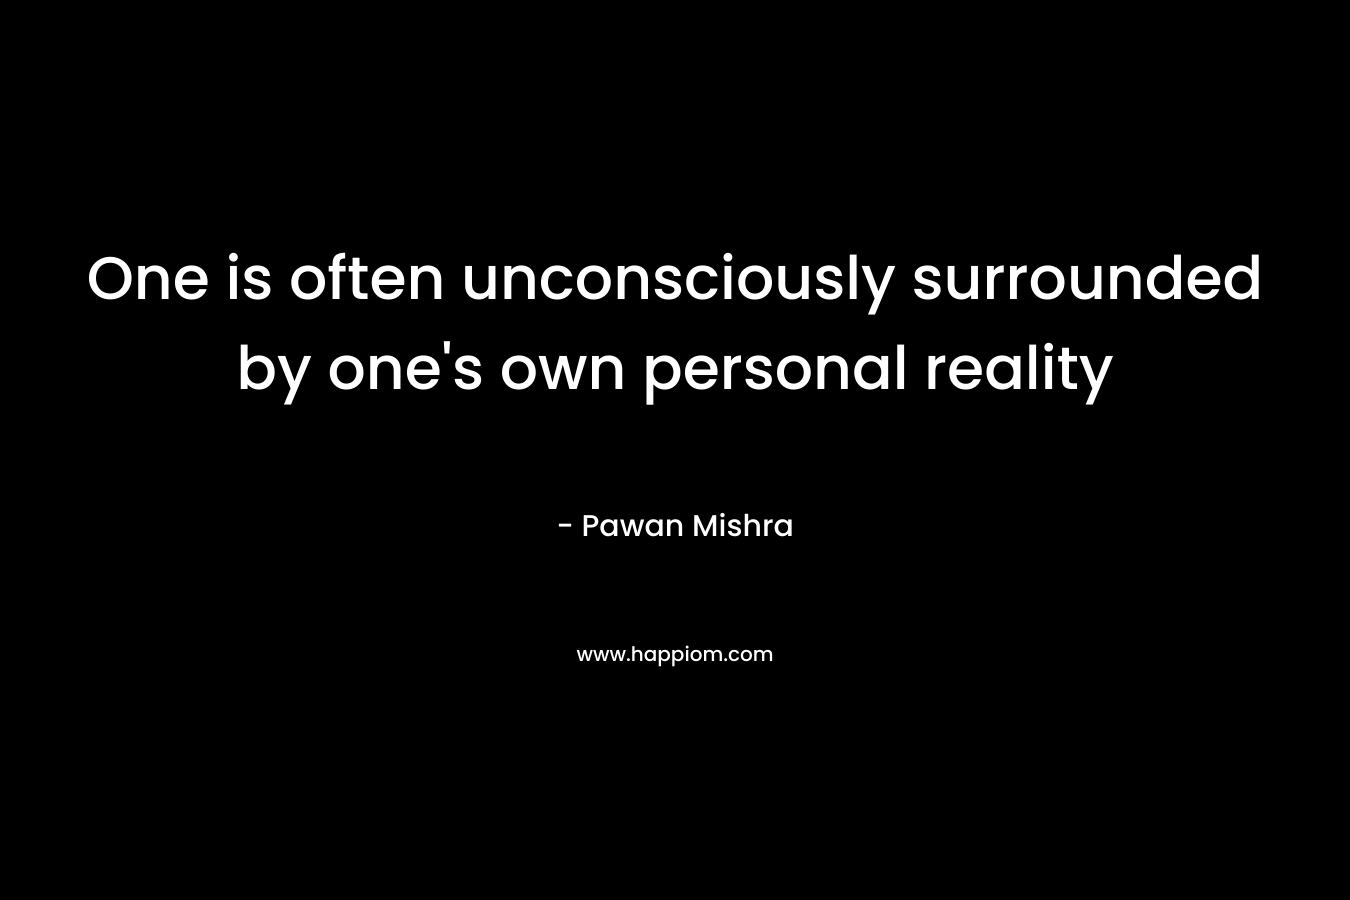 One is often unconsciously surrounded by one's own personal reality